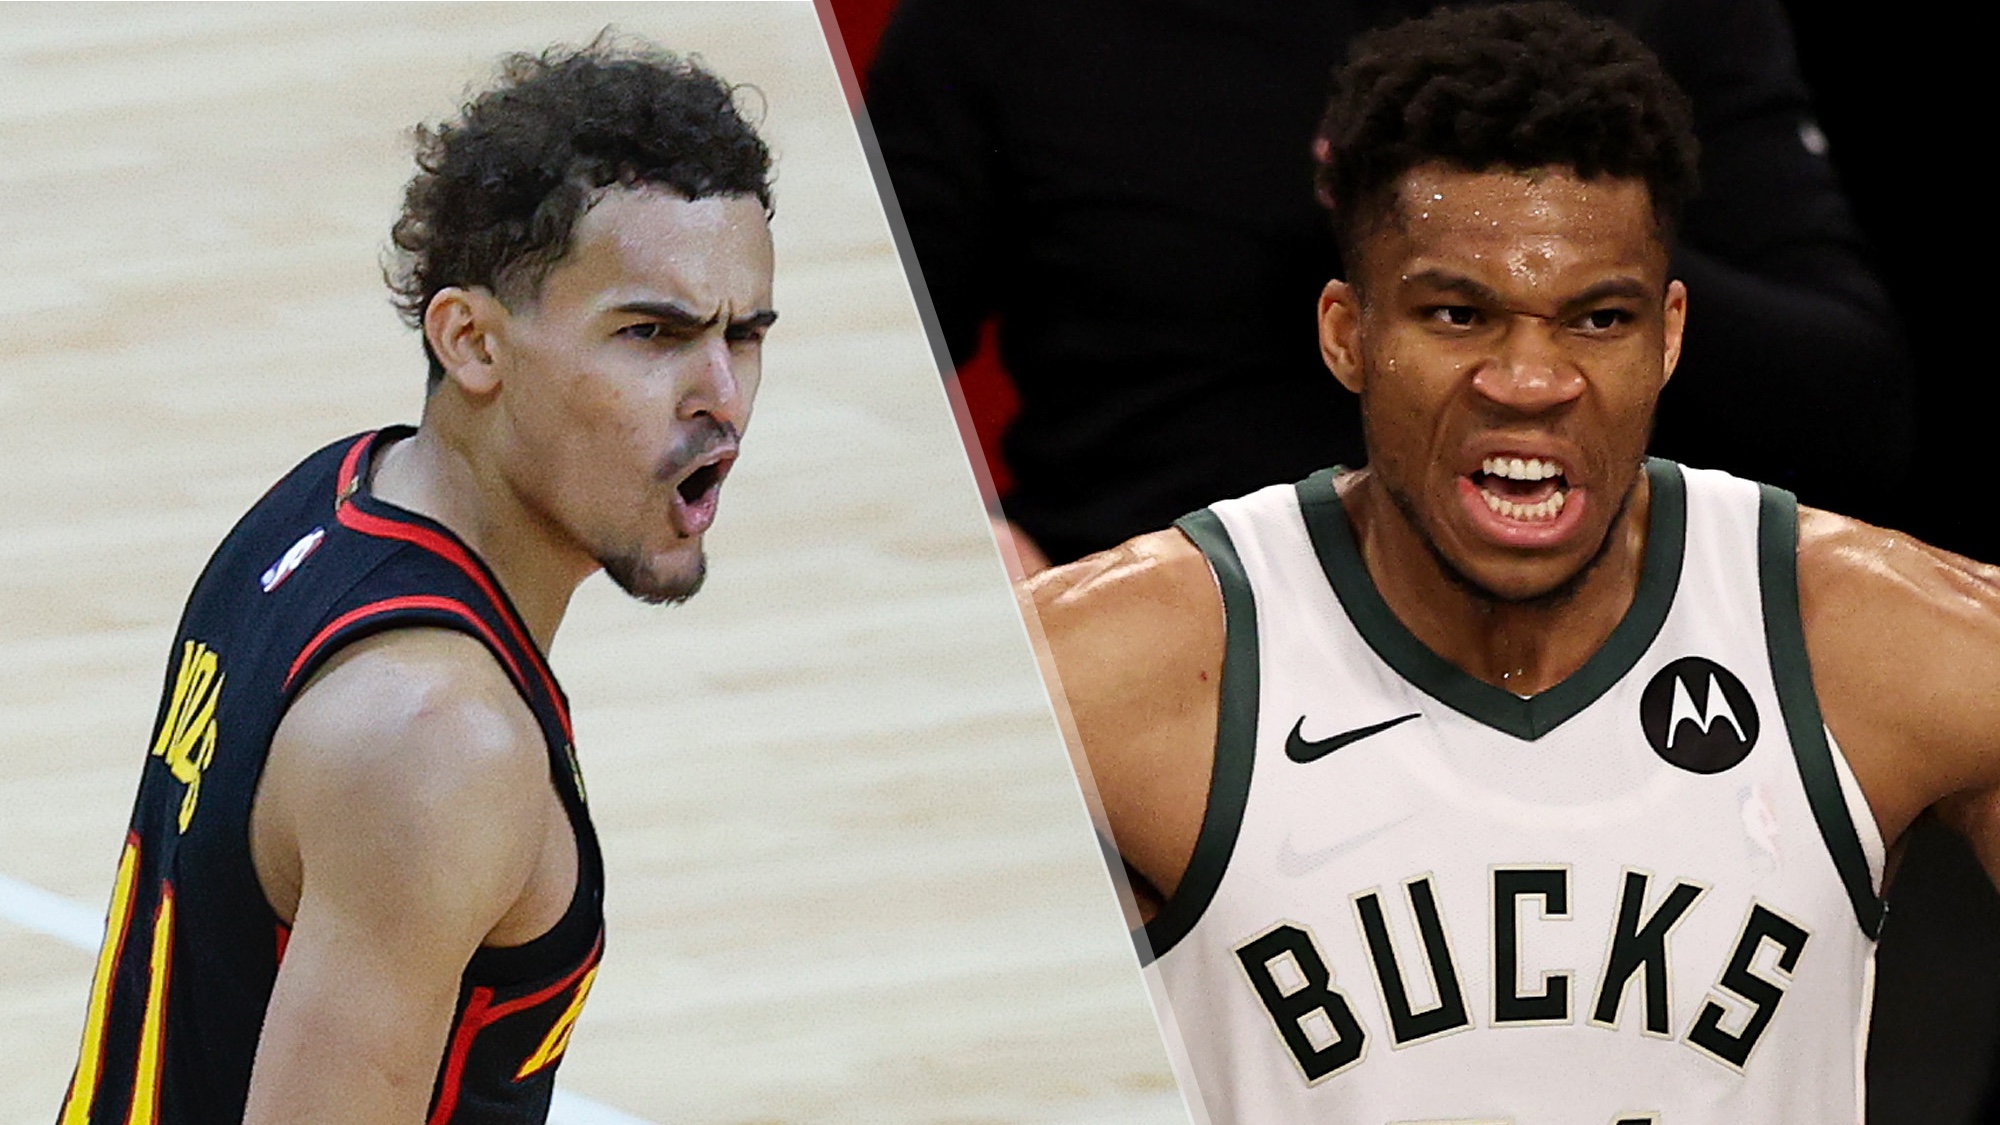 Hawks vs Bucks live stream: How to watch the NBA Playoffs Game 1 online | Tom&#39;s Guide